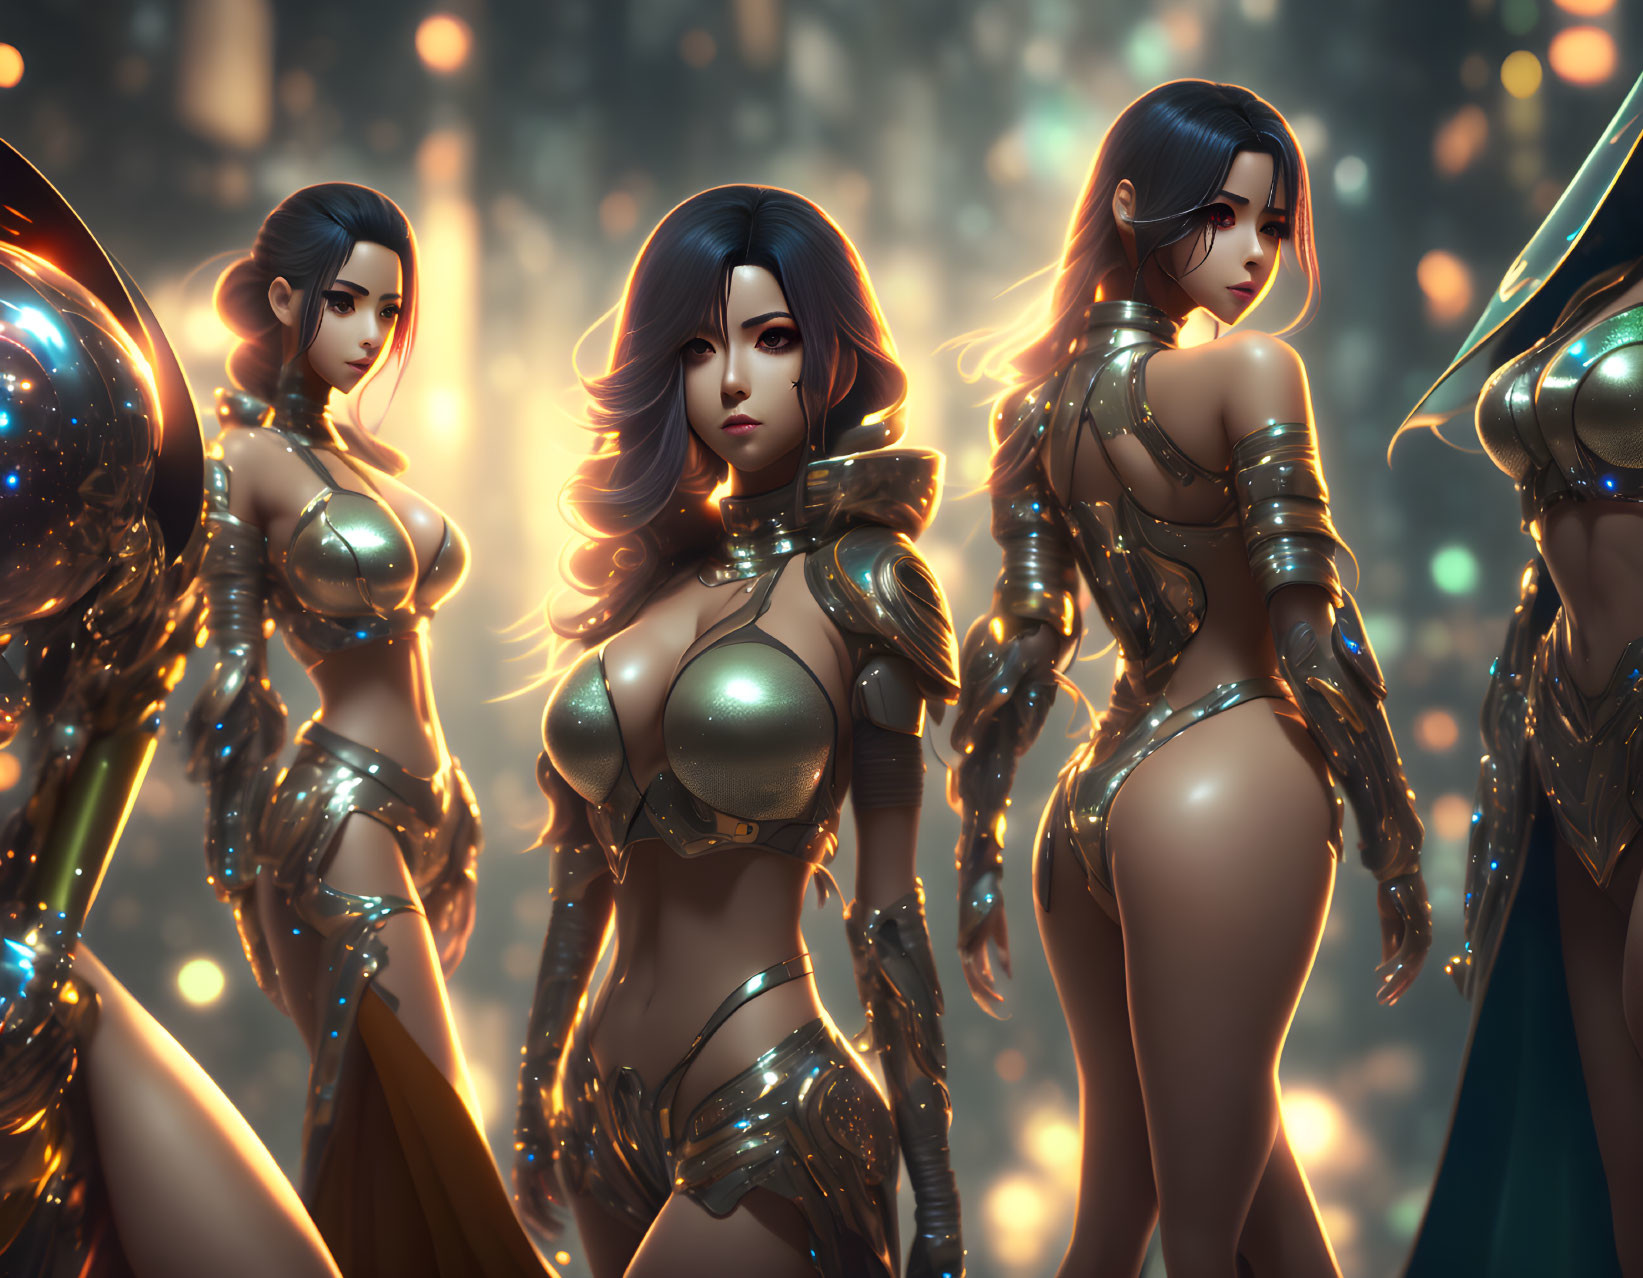 Three stylized female warriors in futuristic armor in glowing forest setting